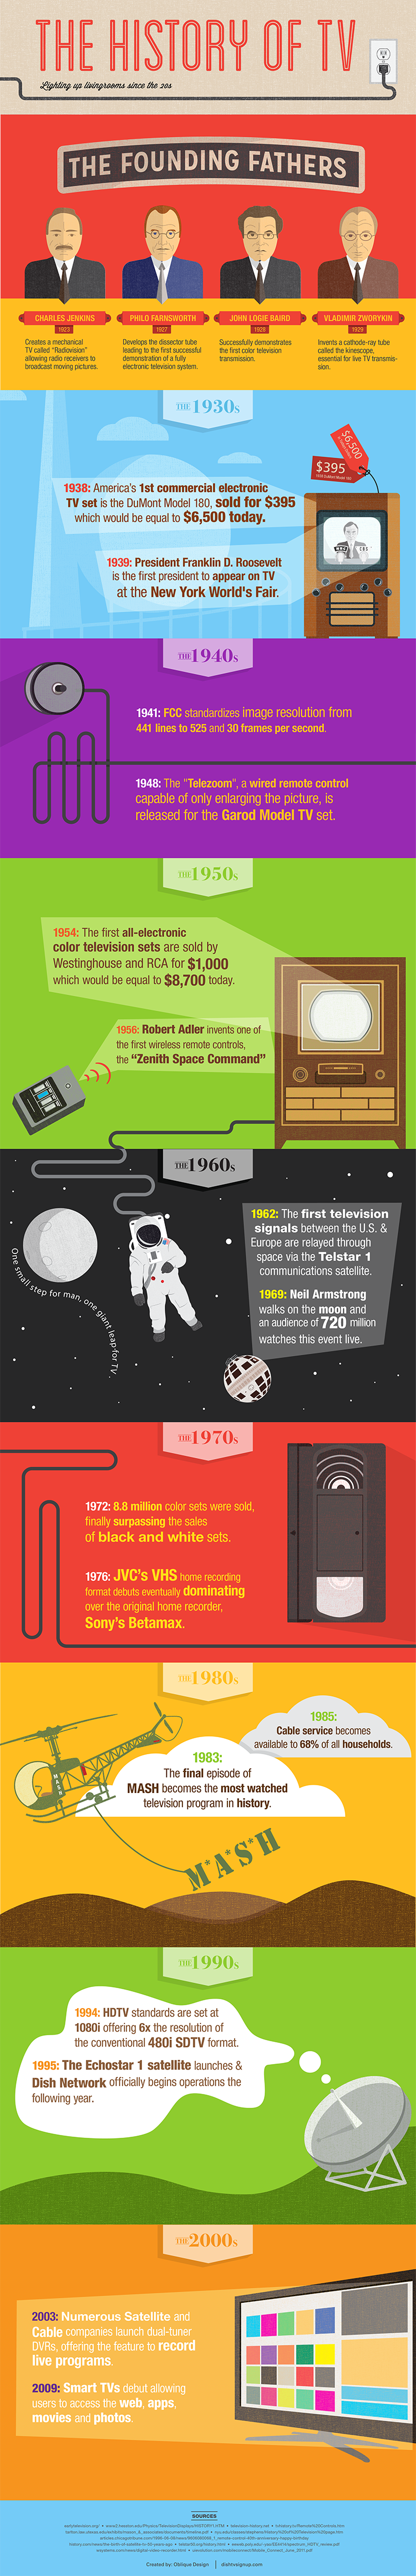 The History of TV